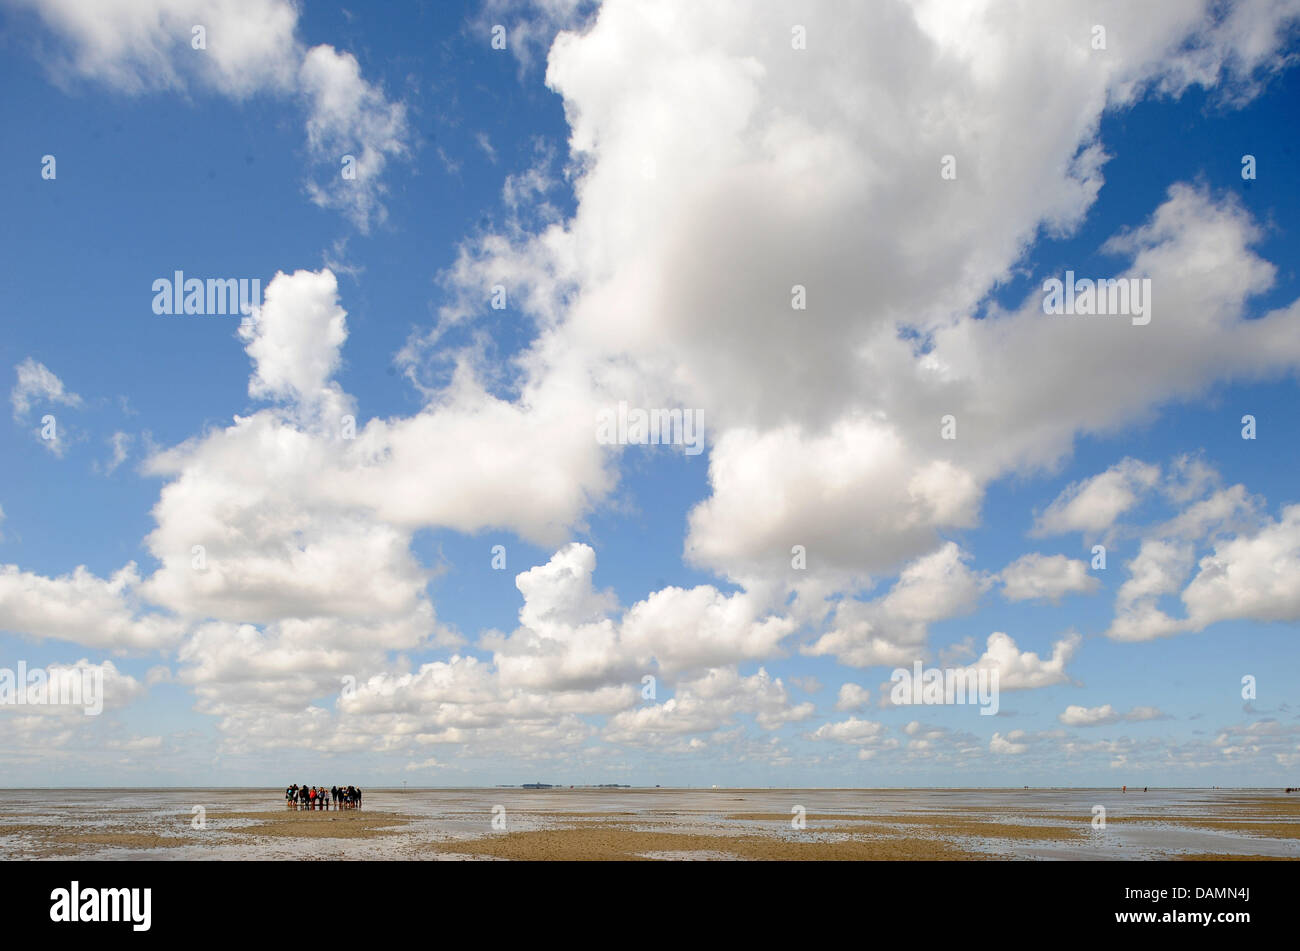 A group of hikers walks at low tide between the North Sea island Neuwerk in Hamburg Wadden Sea National Park and the seaside resort town, Sahlenburg, Germany, 24 June 2011. The decision about whether the Hamburg part of the Wadden Sea will be named a World Natural Heritage site by UNESCO is being delayed and was originally to be decided on 24 June 2011 in Paris. Photo: INGO WAGNER Stock Photo